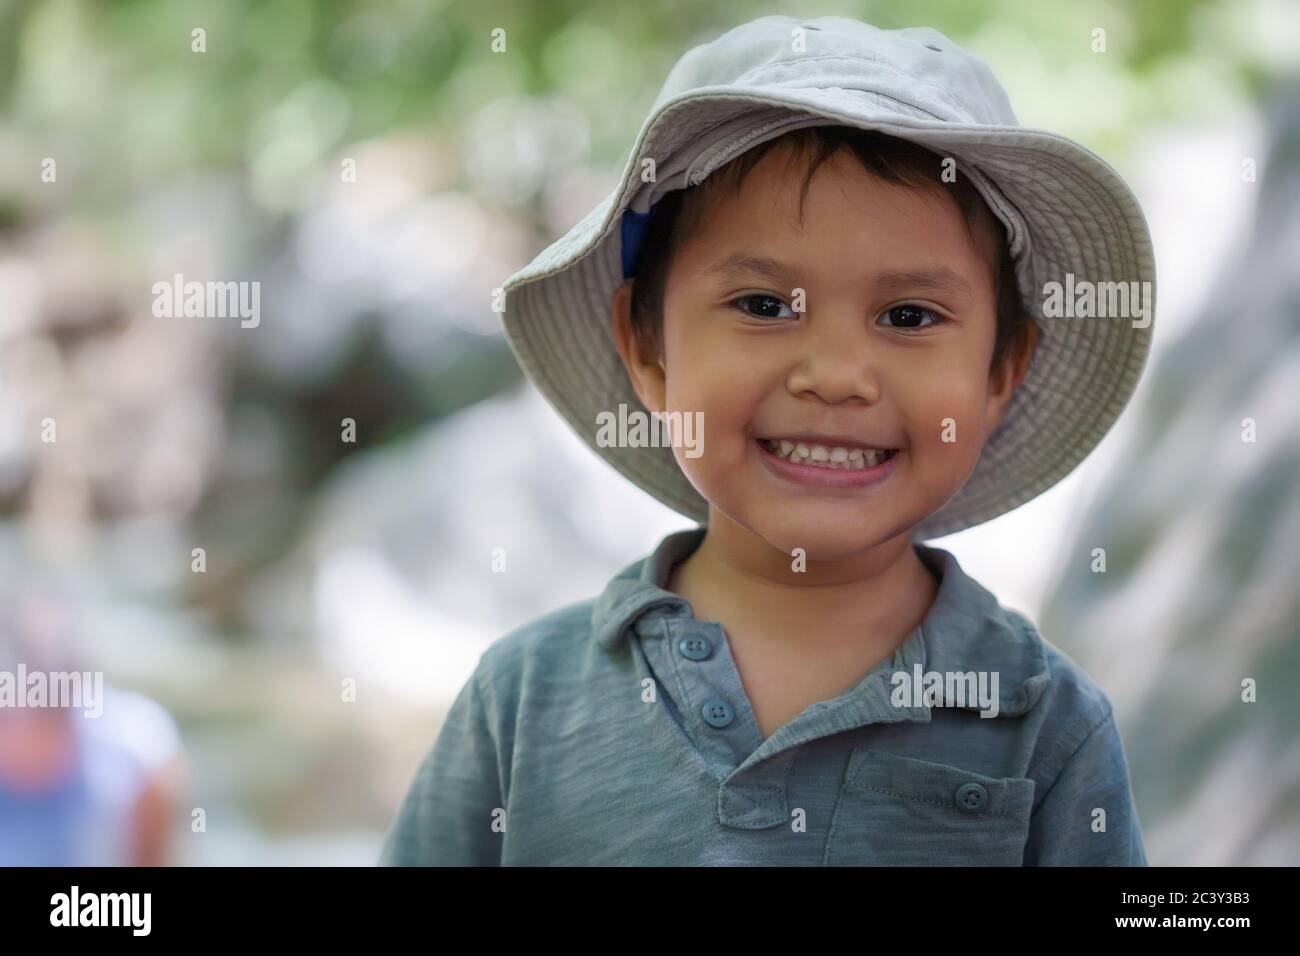 Young Hispanic boy wearing a fishing hat that is smiling and looks happy in a natural outdoor setting. Stock Photo